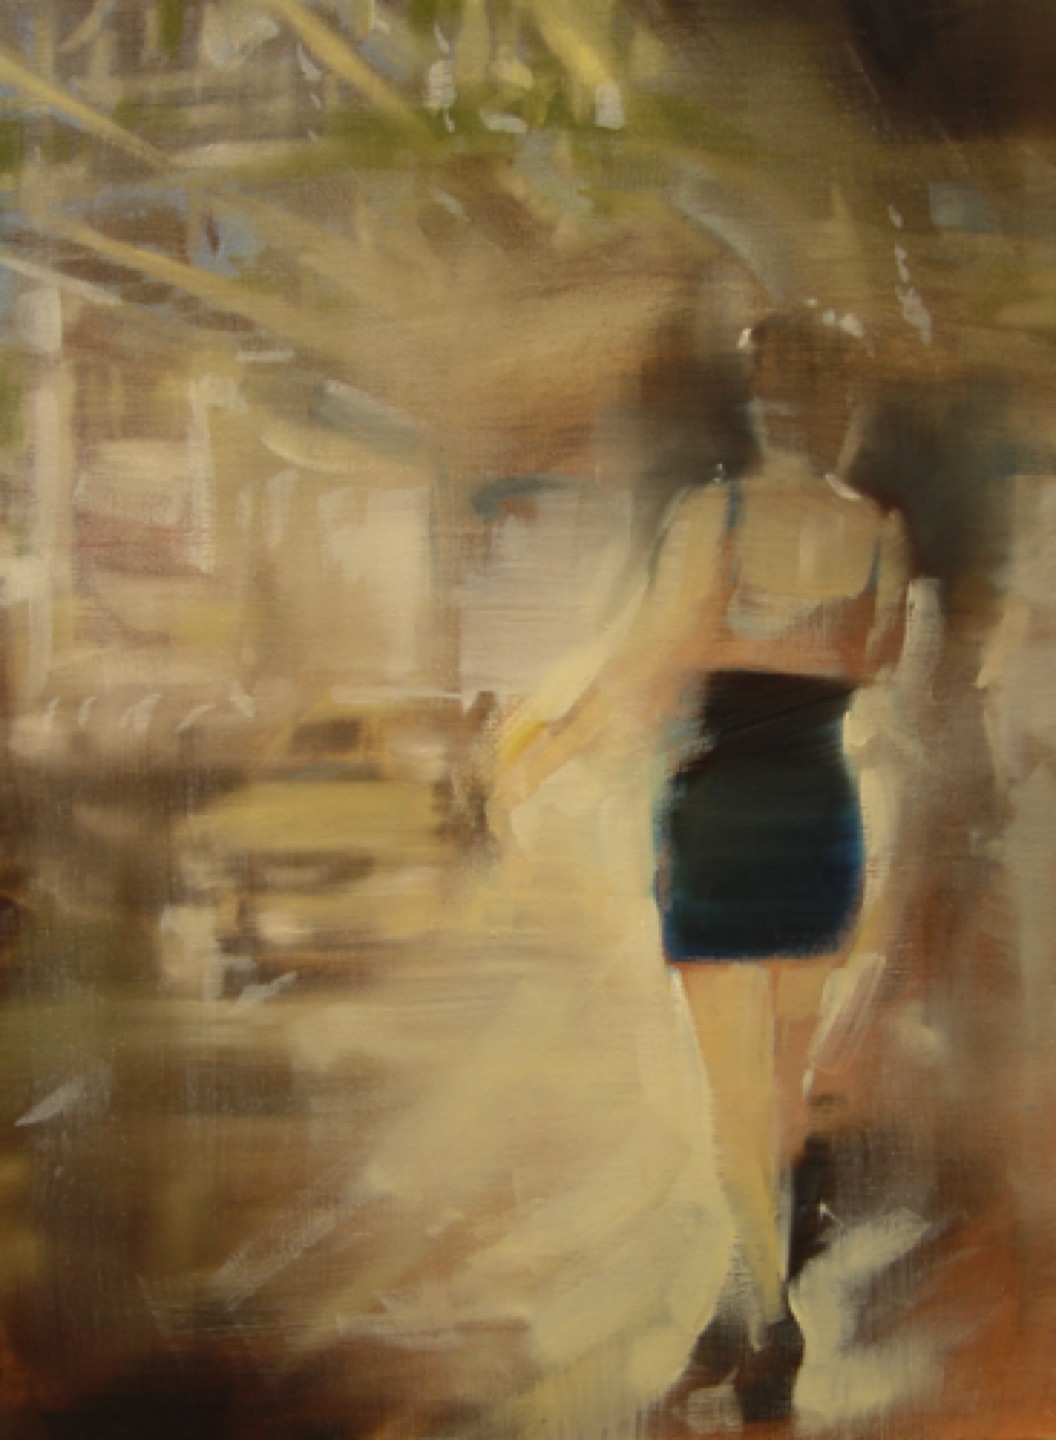 Gregg Chadwick
Under the El
24"x18" oil on linen 2012 
Private Collection, Palm Springs, California